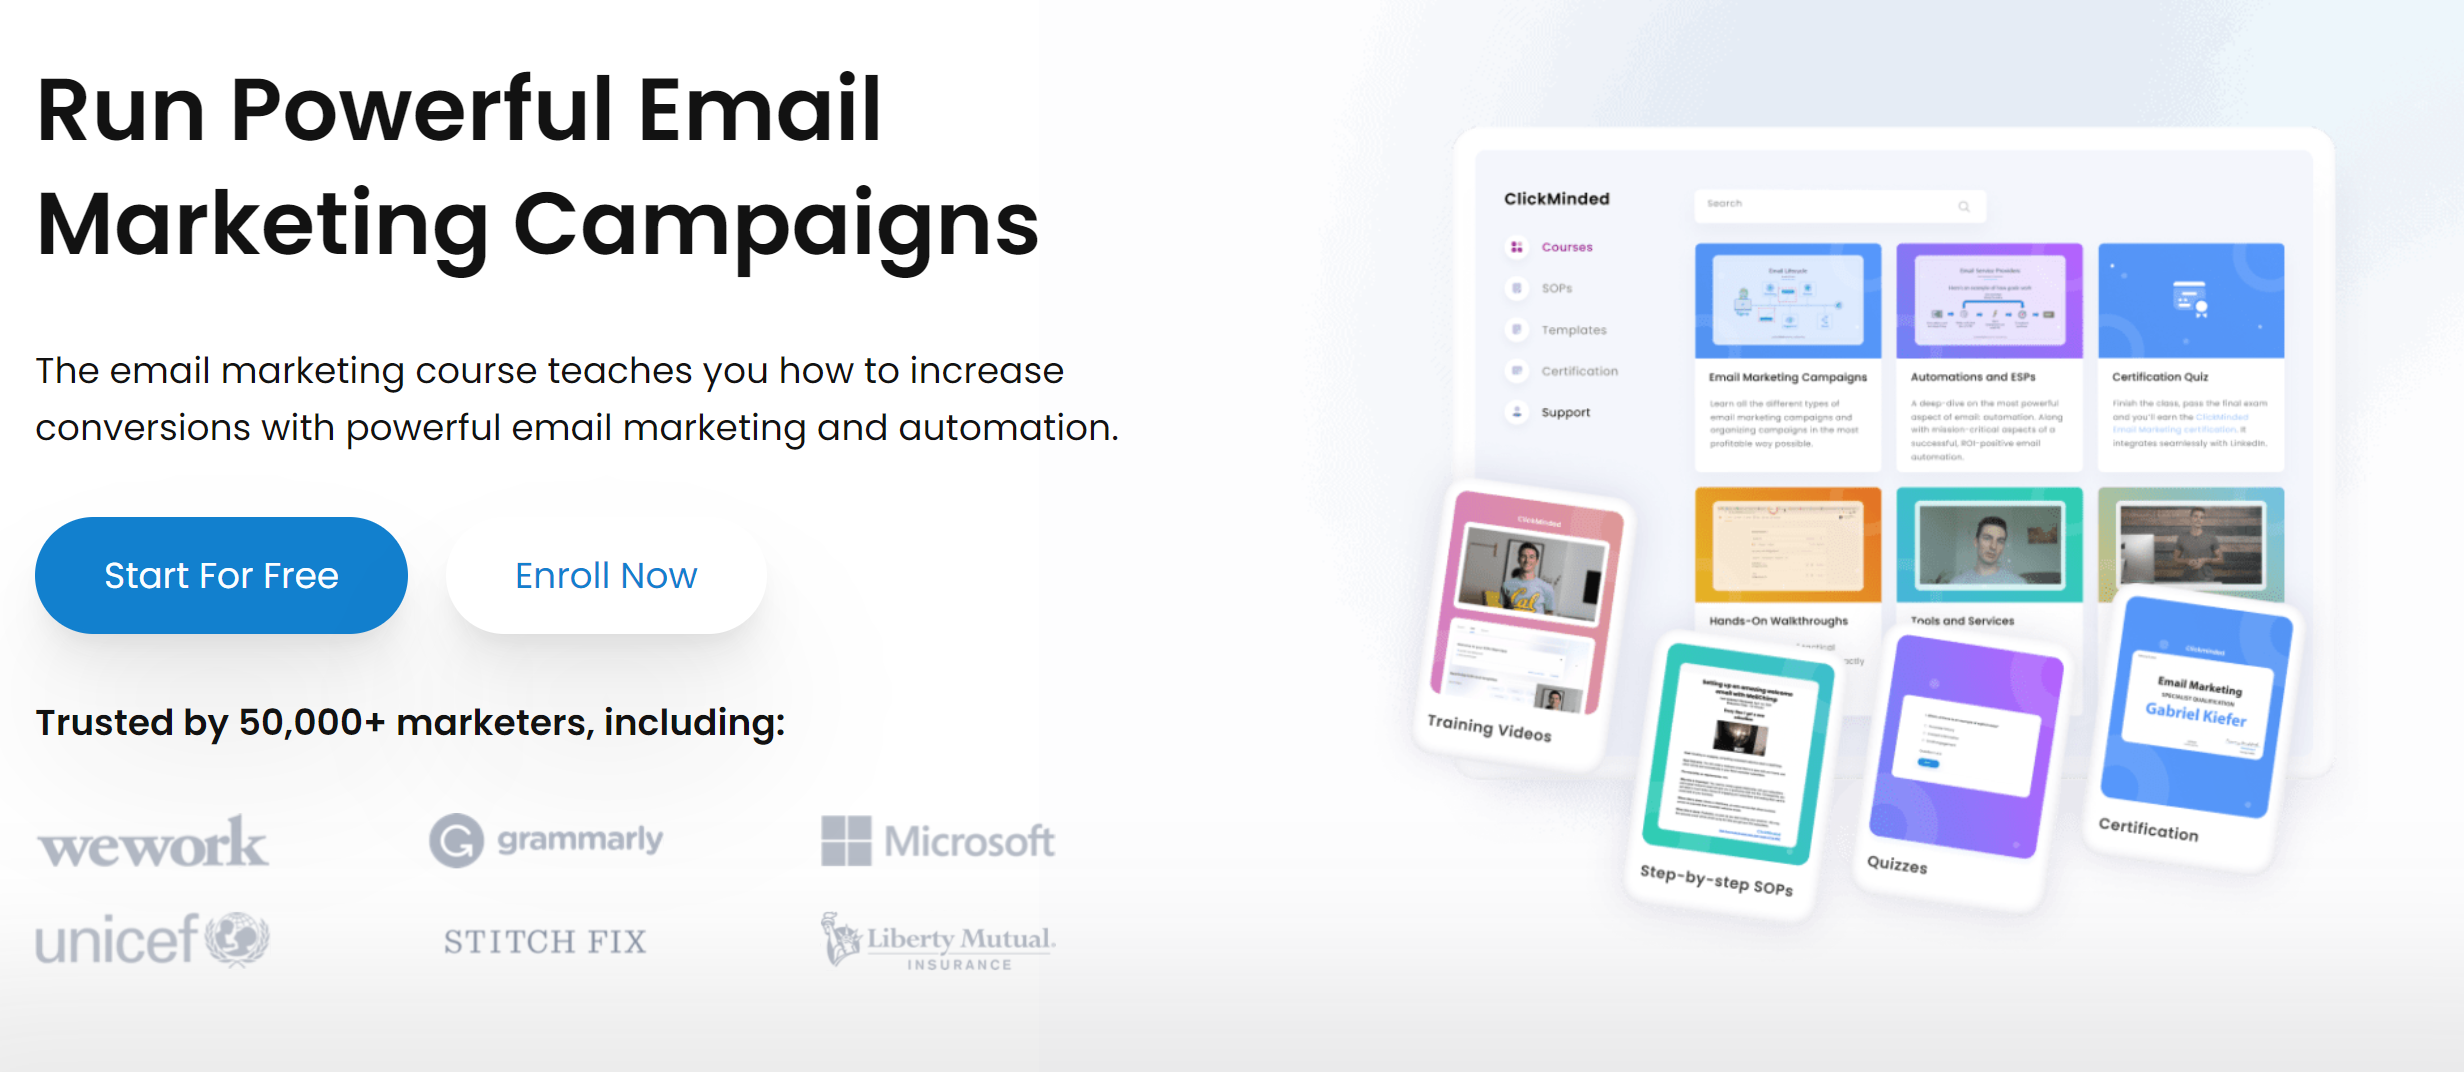 Run powerful email marketing campaigns